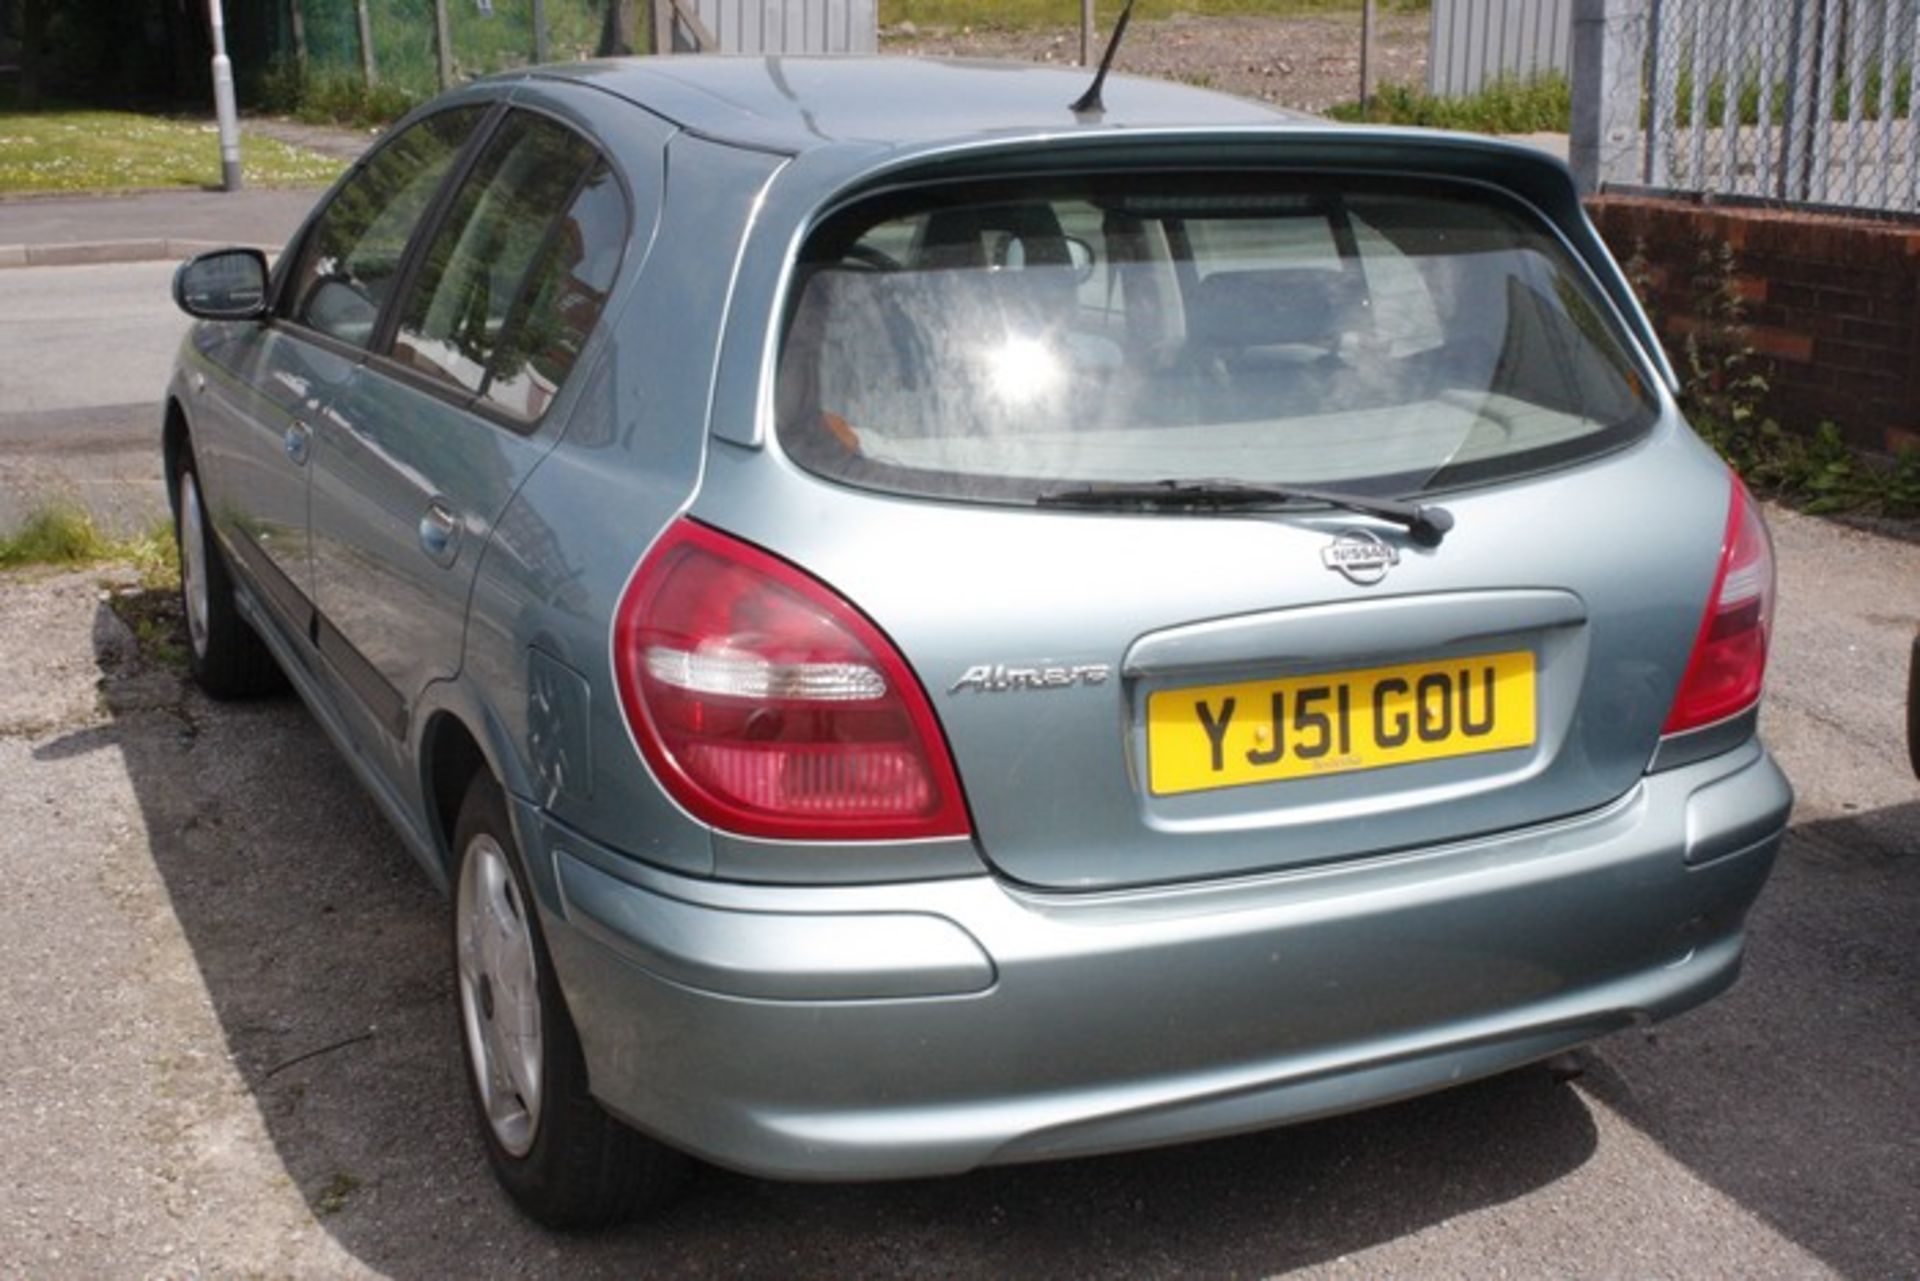 NISSAN ALMERA, YJ51 GOU, 1.5L, 57,600 MILES, SERVICE HISTORY, MOT DATE MARCH 2016, CENTRAL - Image 2 of 10